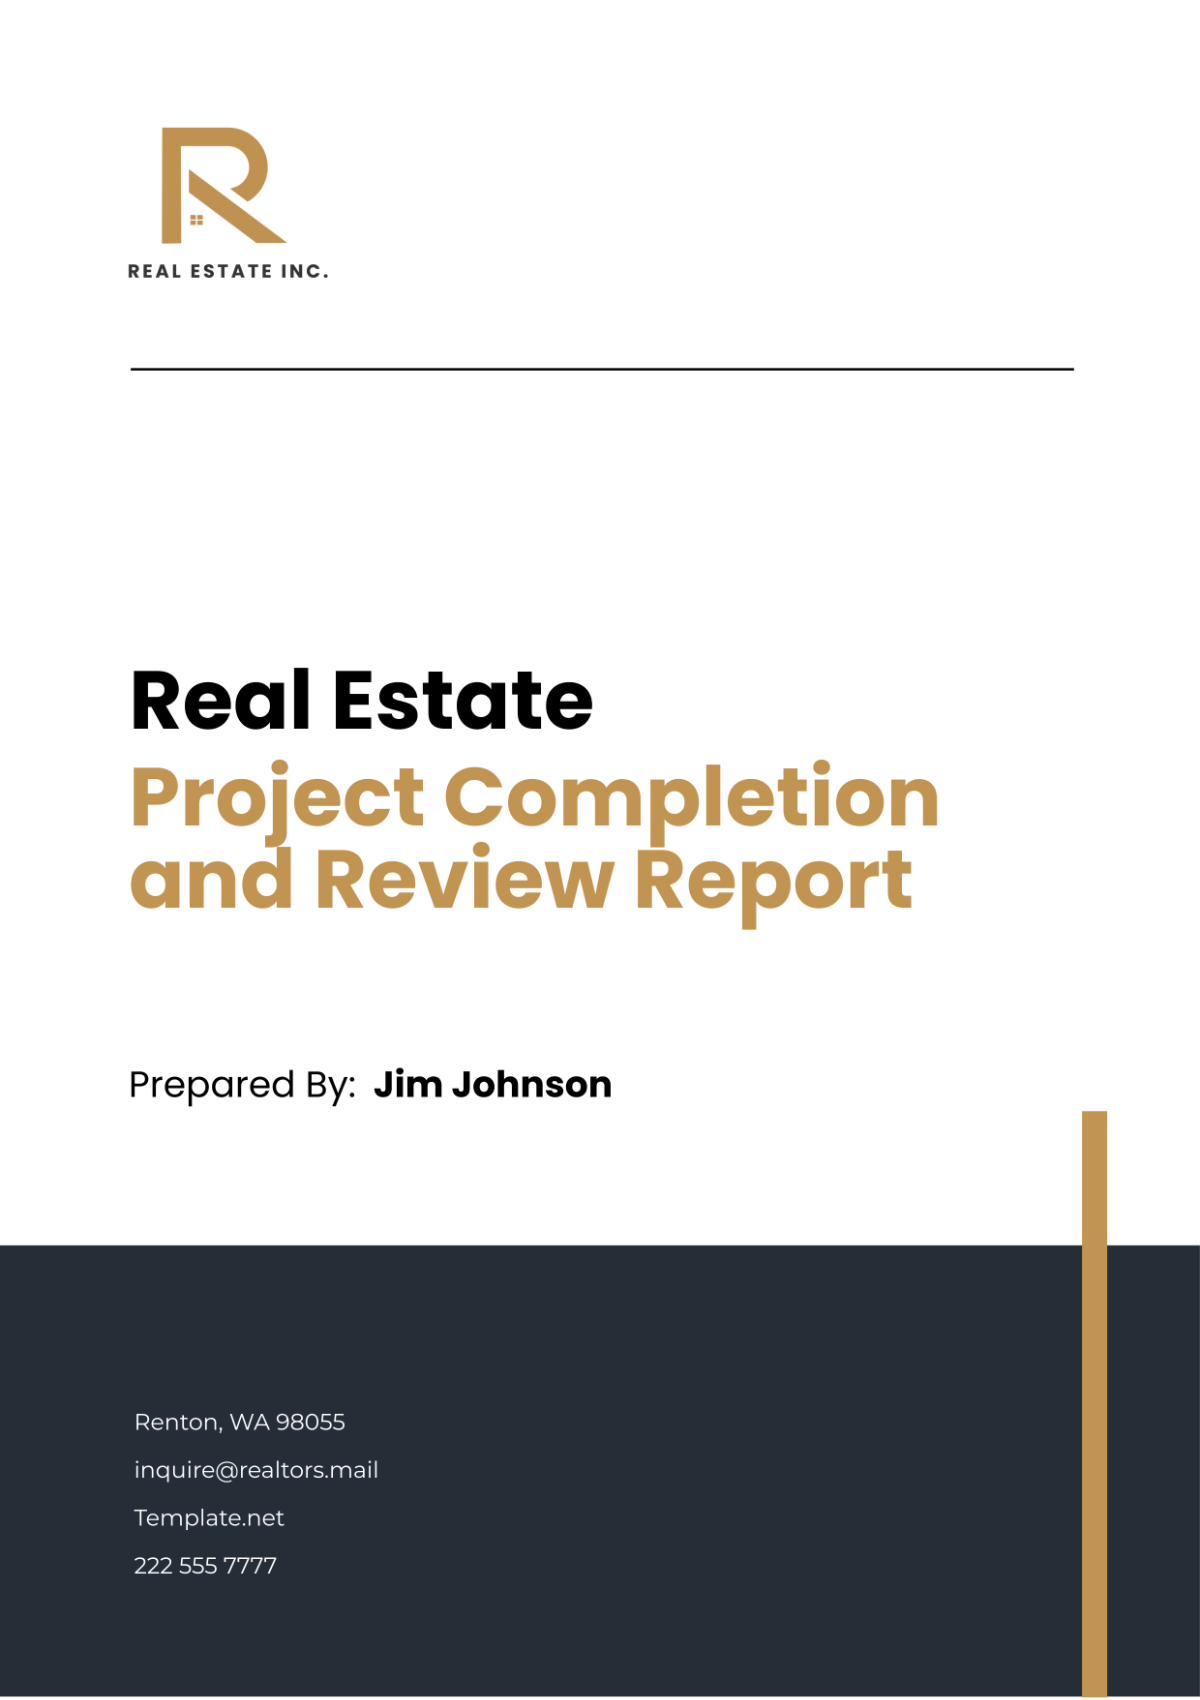 Real Estate Project Completion and Review Report Template